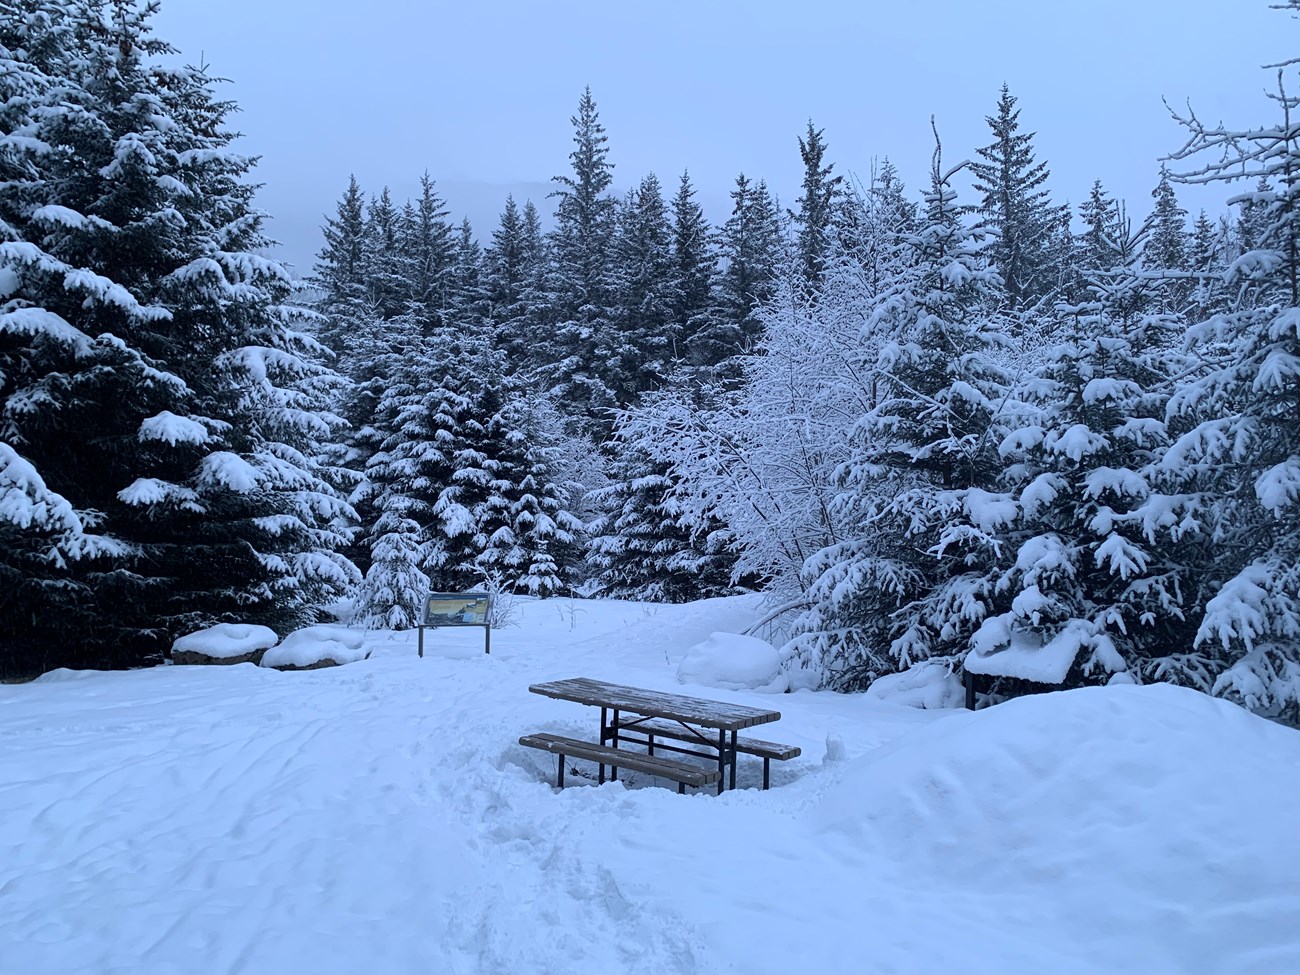 A snowy forest scene with a picnic table covered in snow and an uncovered wayside sign.